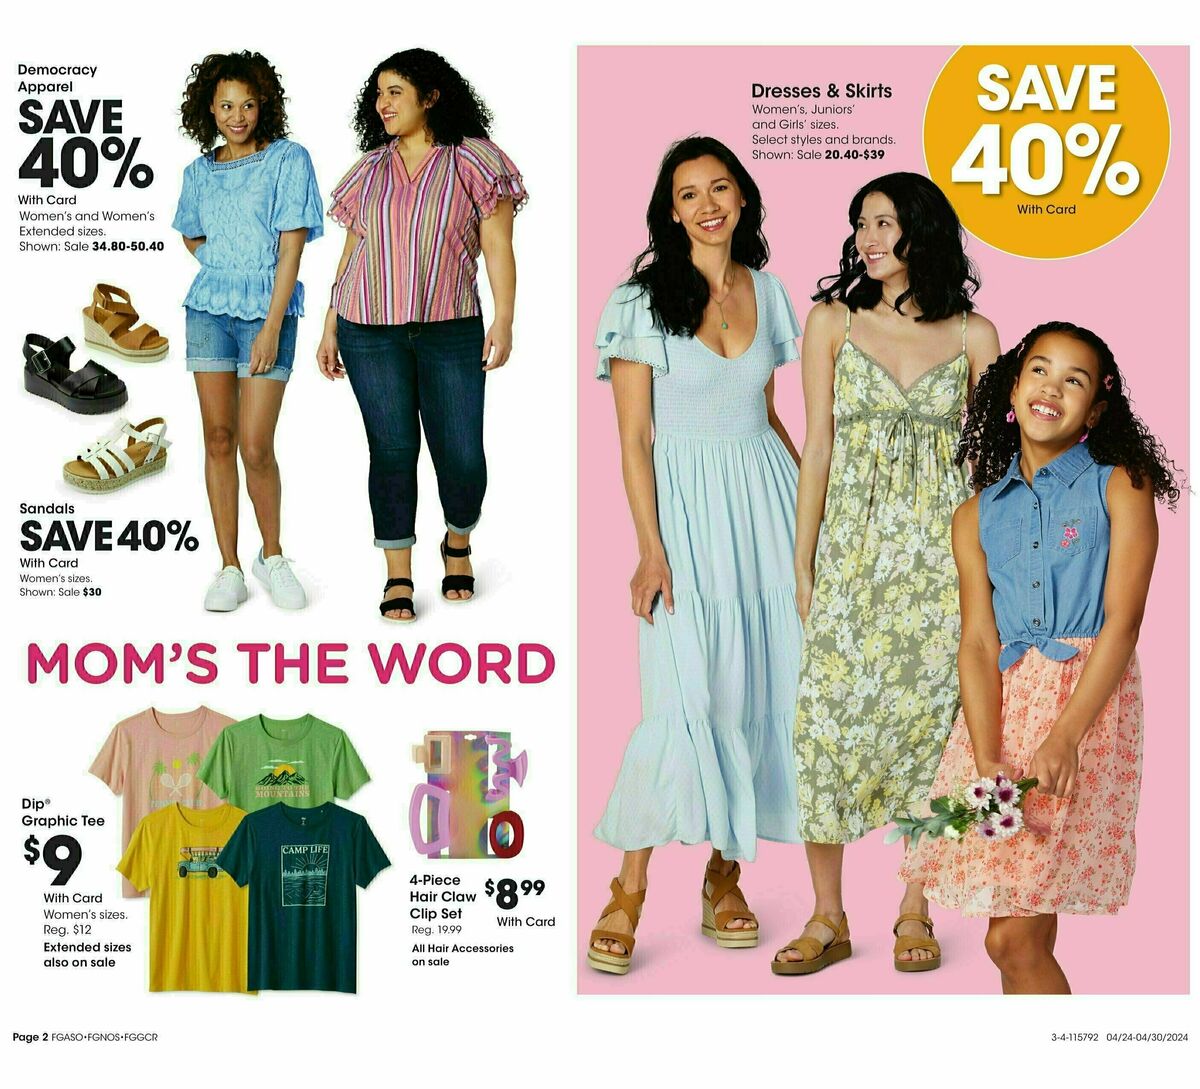 Fred Meyer General Merchandise Weekly Ad from April 24